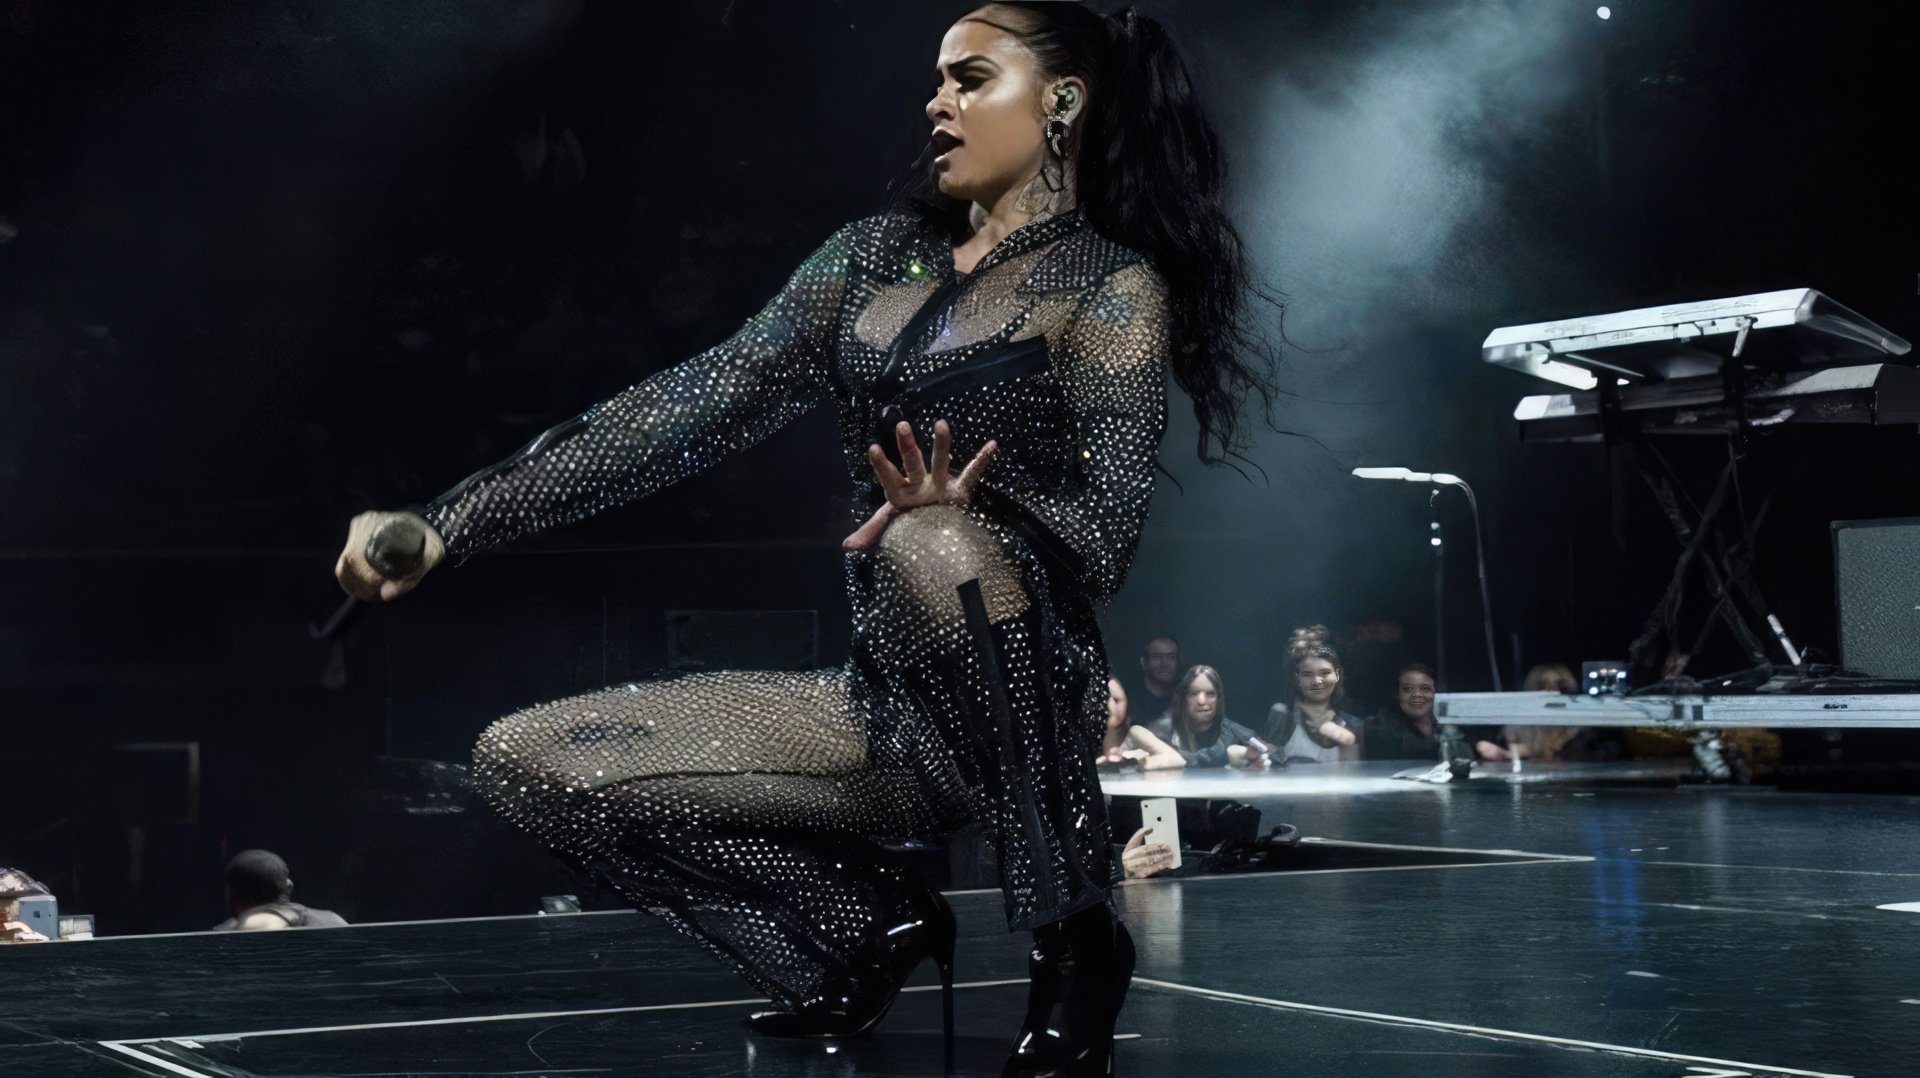 At the age of 18, Kehlani started her solo career